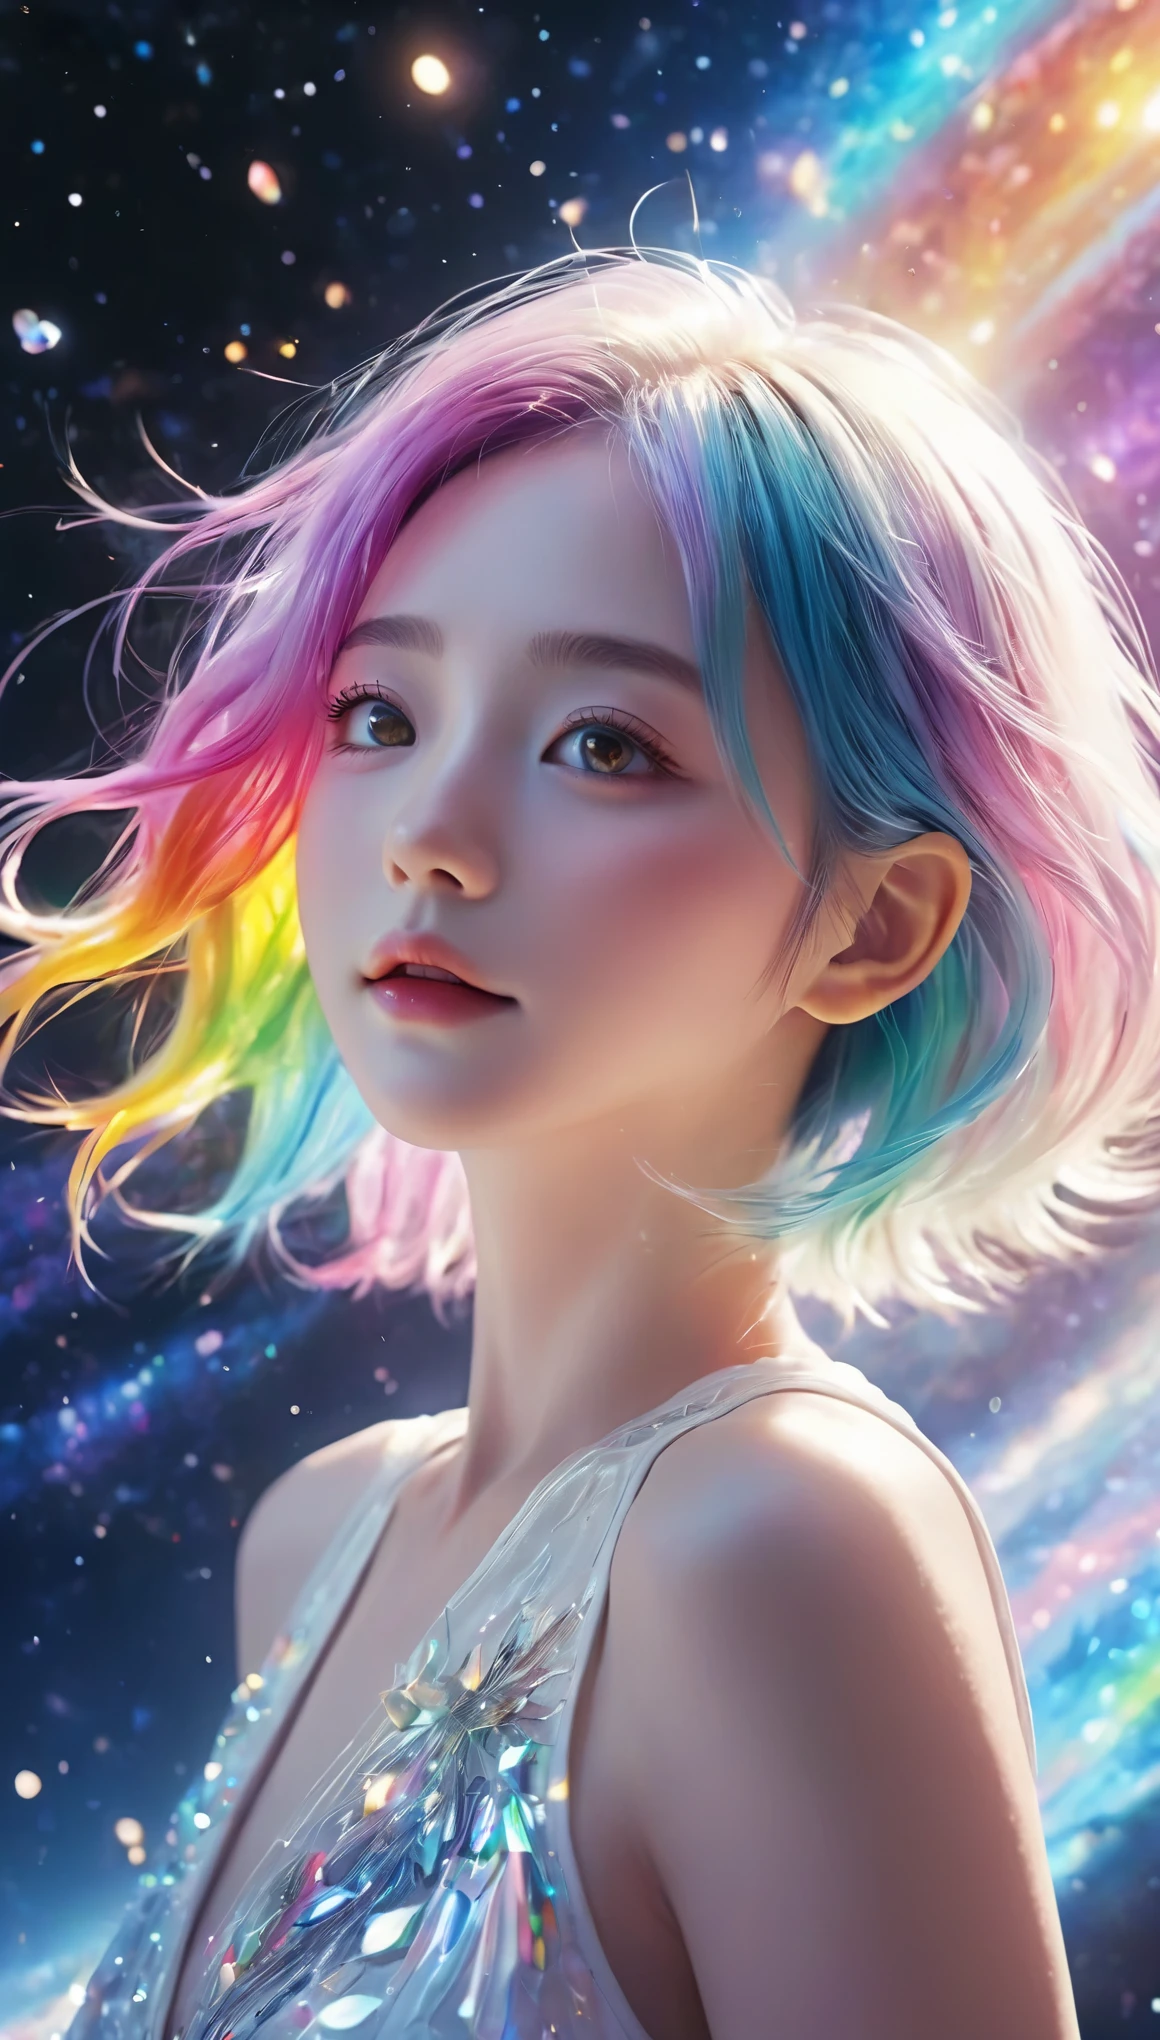 floating in space、((whole body))、reach out, highest quality, Highly detailed CG synthesis 8k wallpaper, movie lighting, Lens flare, beautiful detail eyes, White clothes,  multicolored hair, Rich and colorful light, particle, 16 years old、girl、laugh fearlessly、Rainbow Hair、Big Bang Girl,((The edge of the universe can be seen on the lining))、dark matter、energy、Retro and psychedelic、Create miracles with a single photon、From Blink to Quasar、It&#39;s too bright to keep looking、The Super Burst is what draws you in